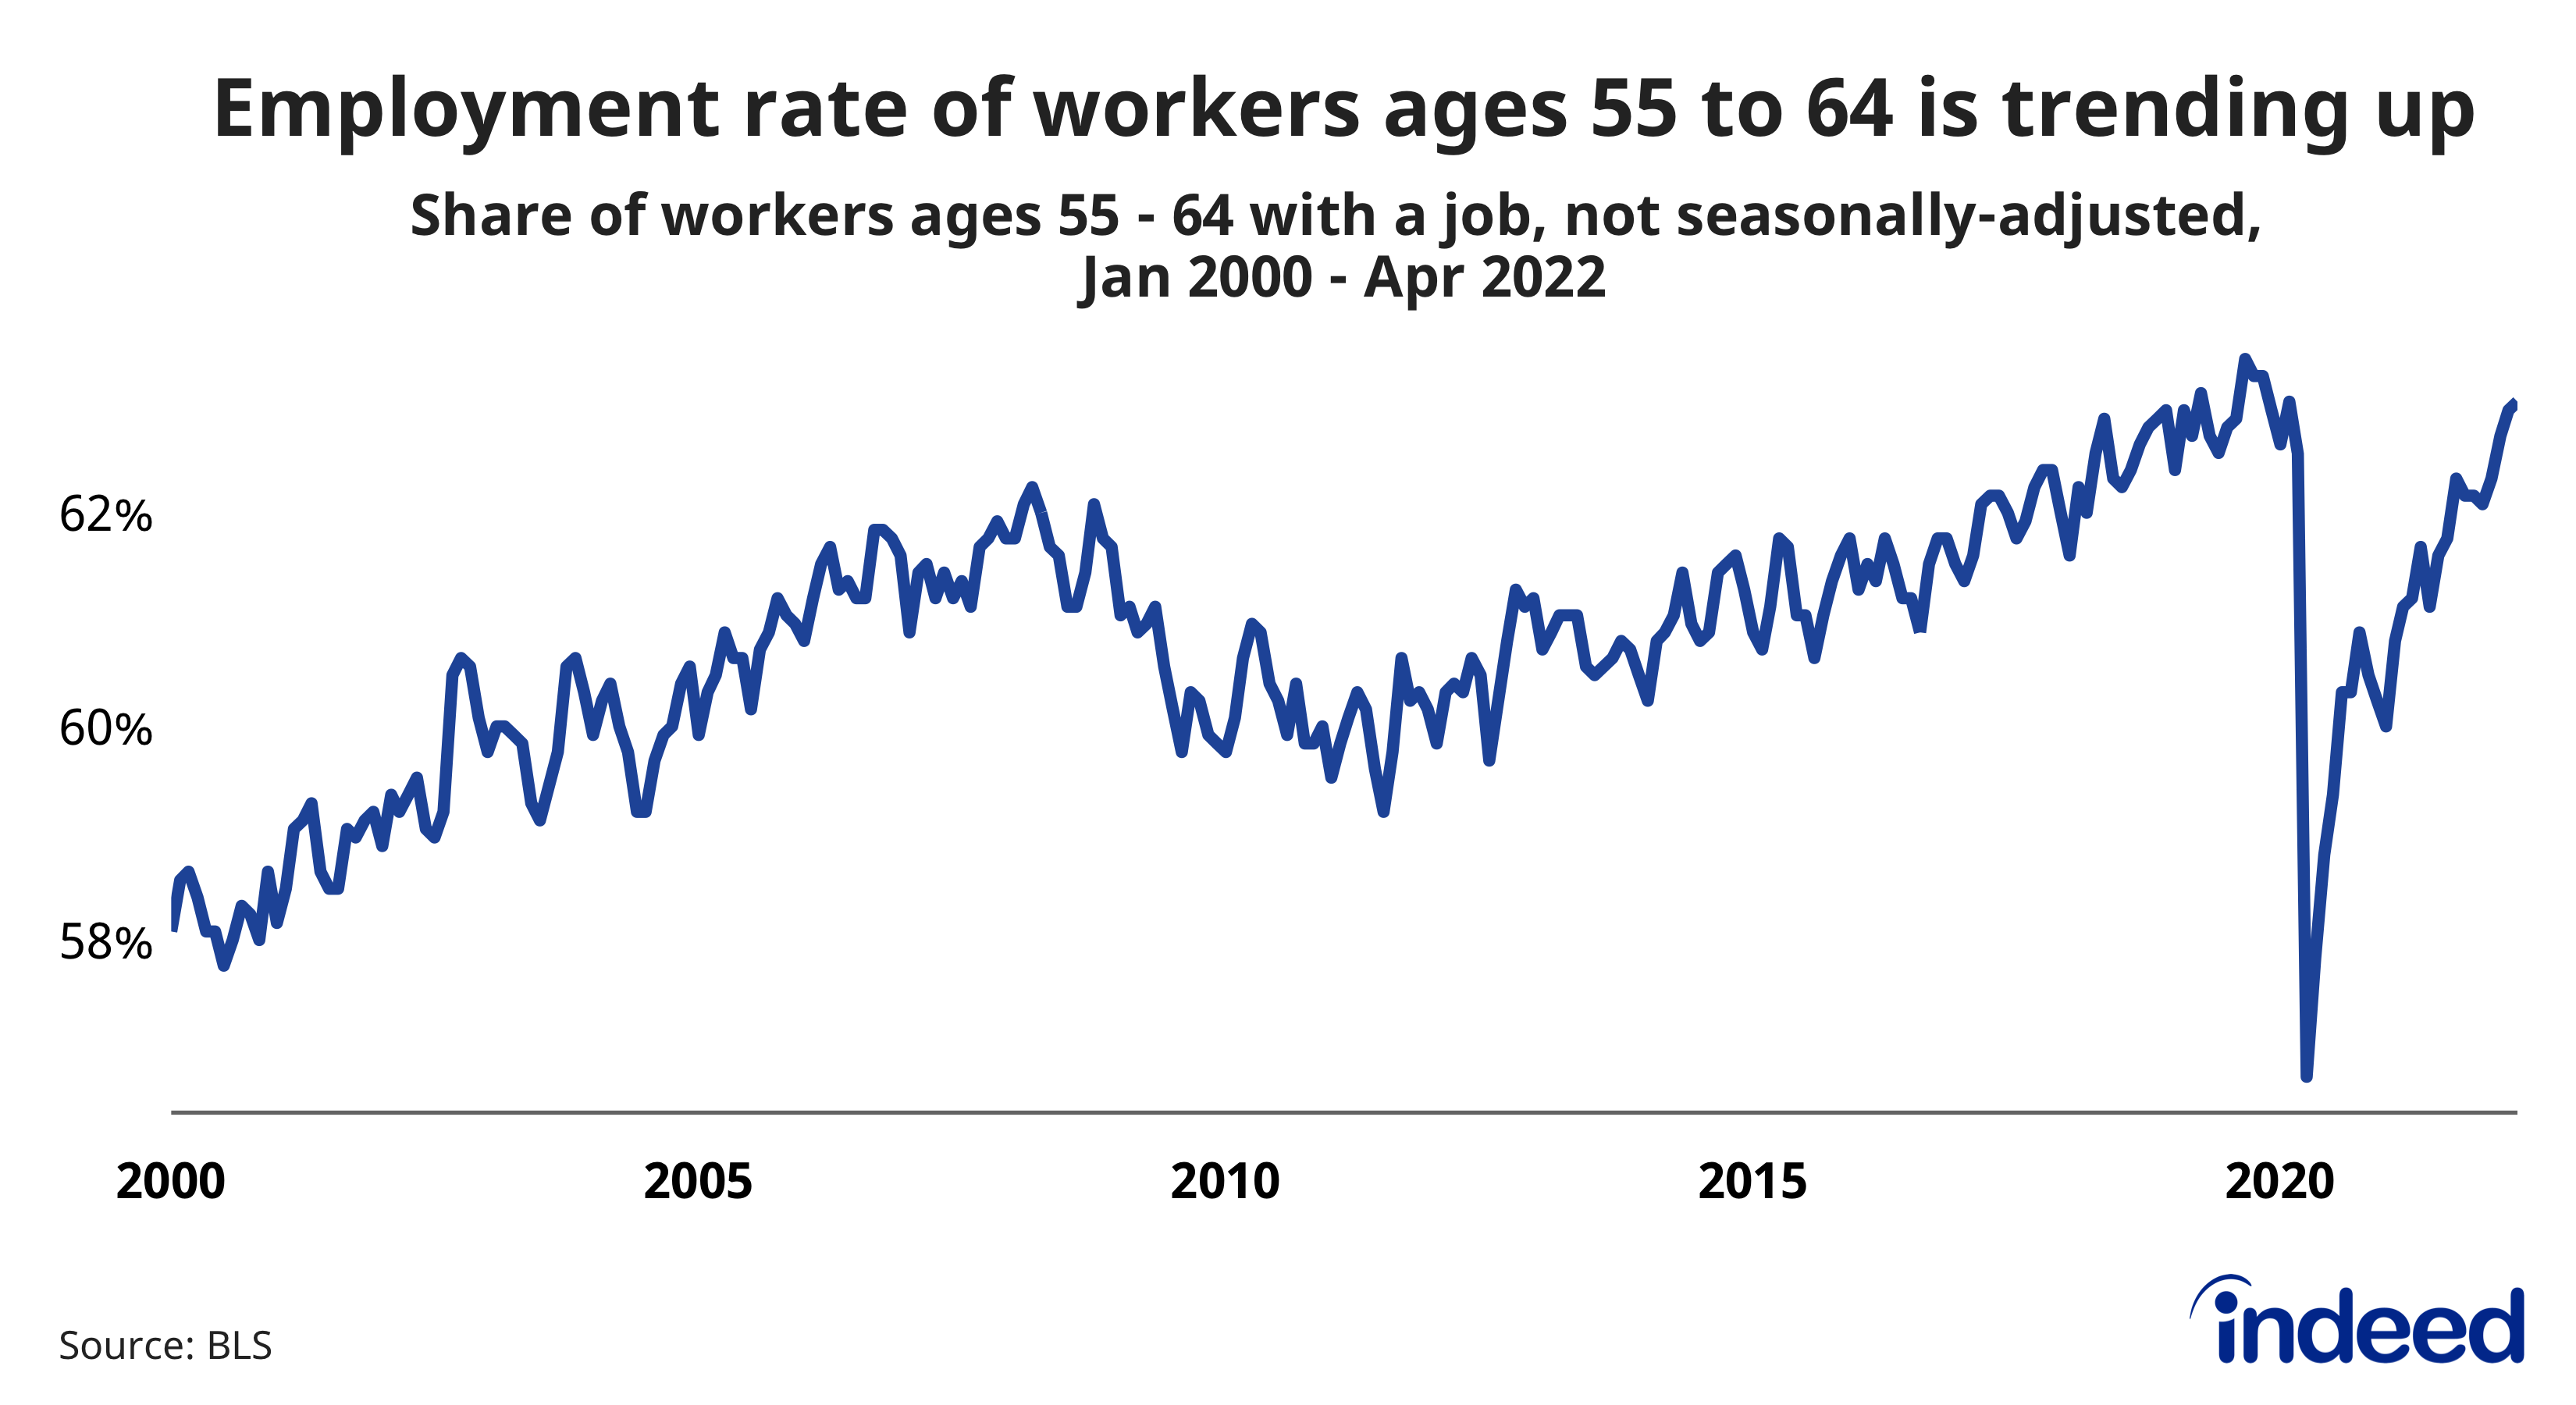 Line chart depicting the share of workers ages 55 to 64 with a job from January 2000 to April 2022. The chart shows that the employment rate of workers ages 55 to 64 is trending up, continuing a recent rise